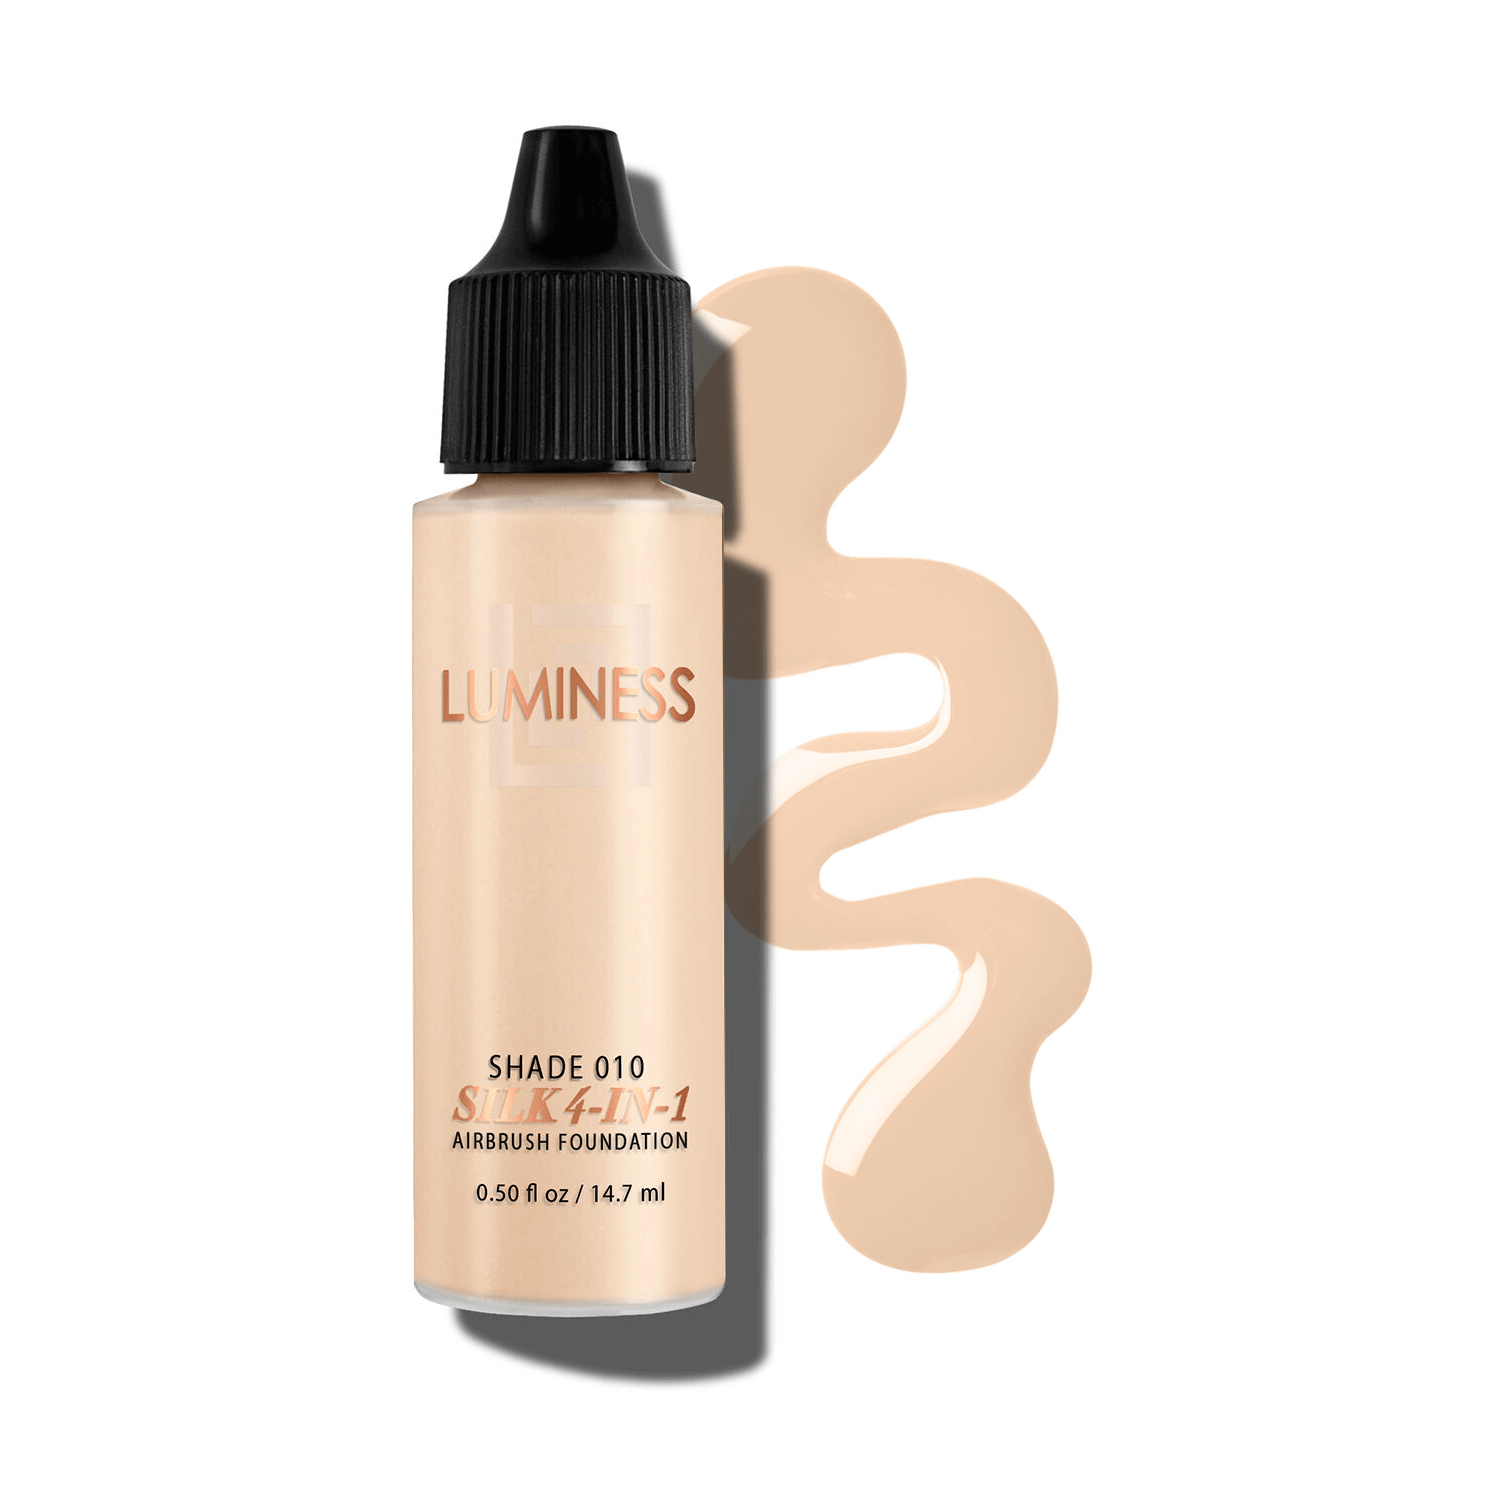 LUMINESS Airbrush Silk 4-in-1 Foundation Makeup Starter Kit: 2 Airbrush  Foundations, High-Coverage Concealer, and an All-in-One Foundation